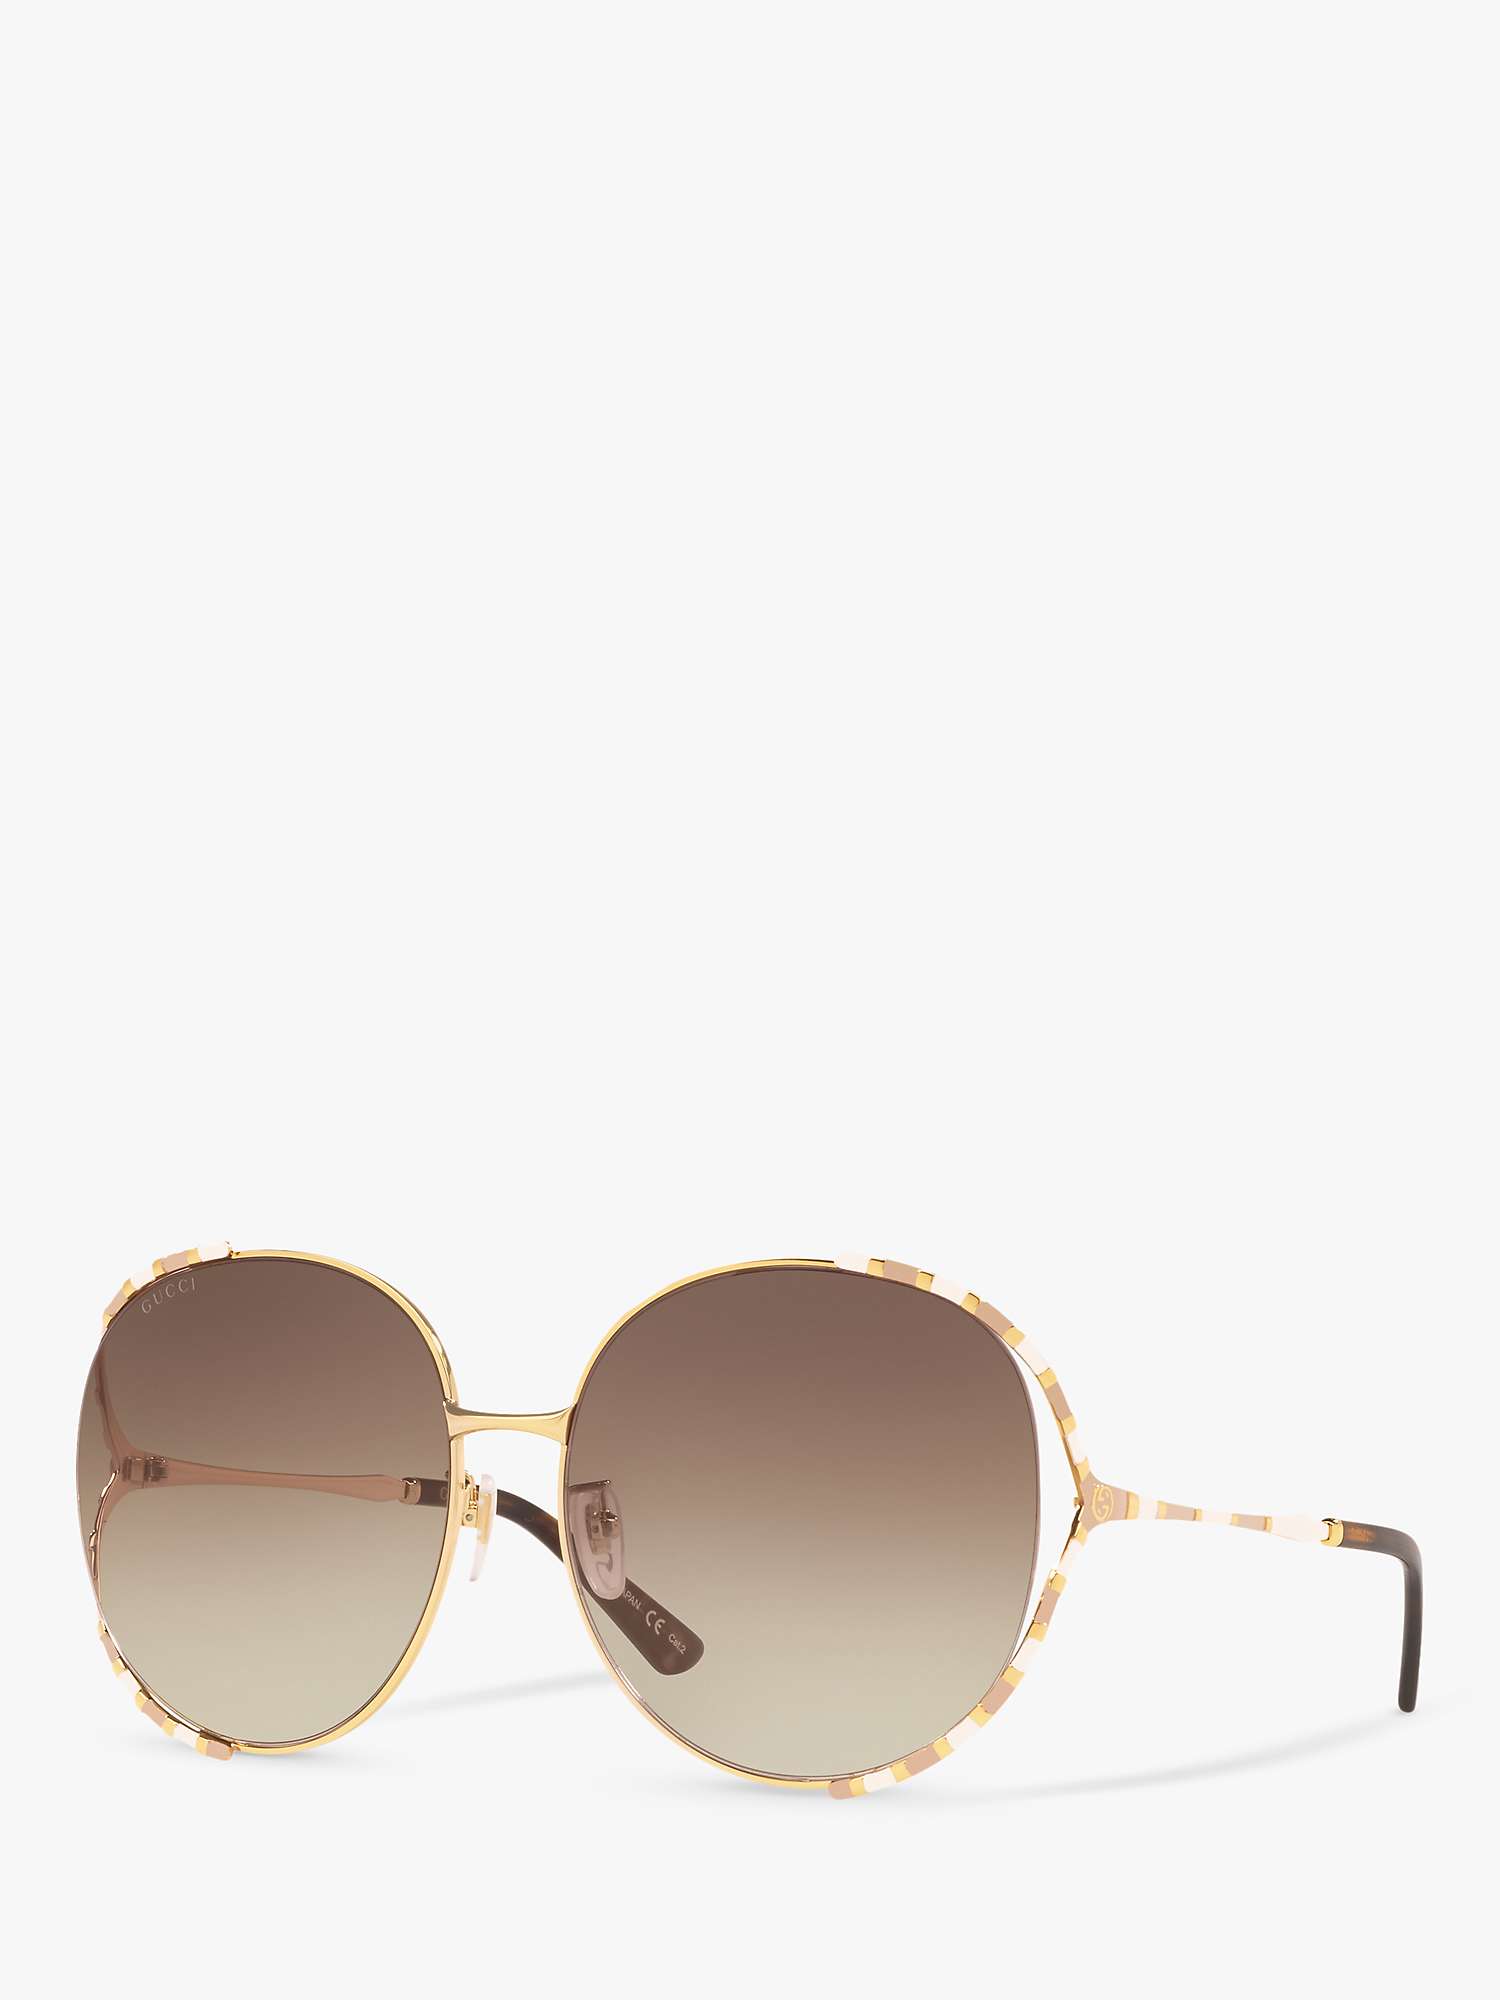 Gucci GG0595S Women's Oversized Oval Sunglasses, Gold/Brown Gradient at  John Lewis & Partners